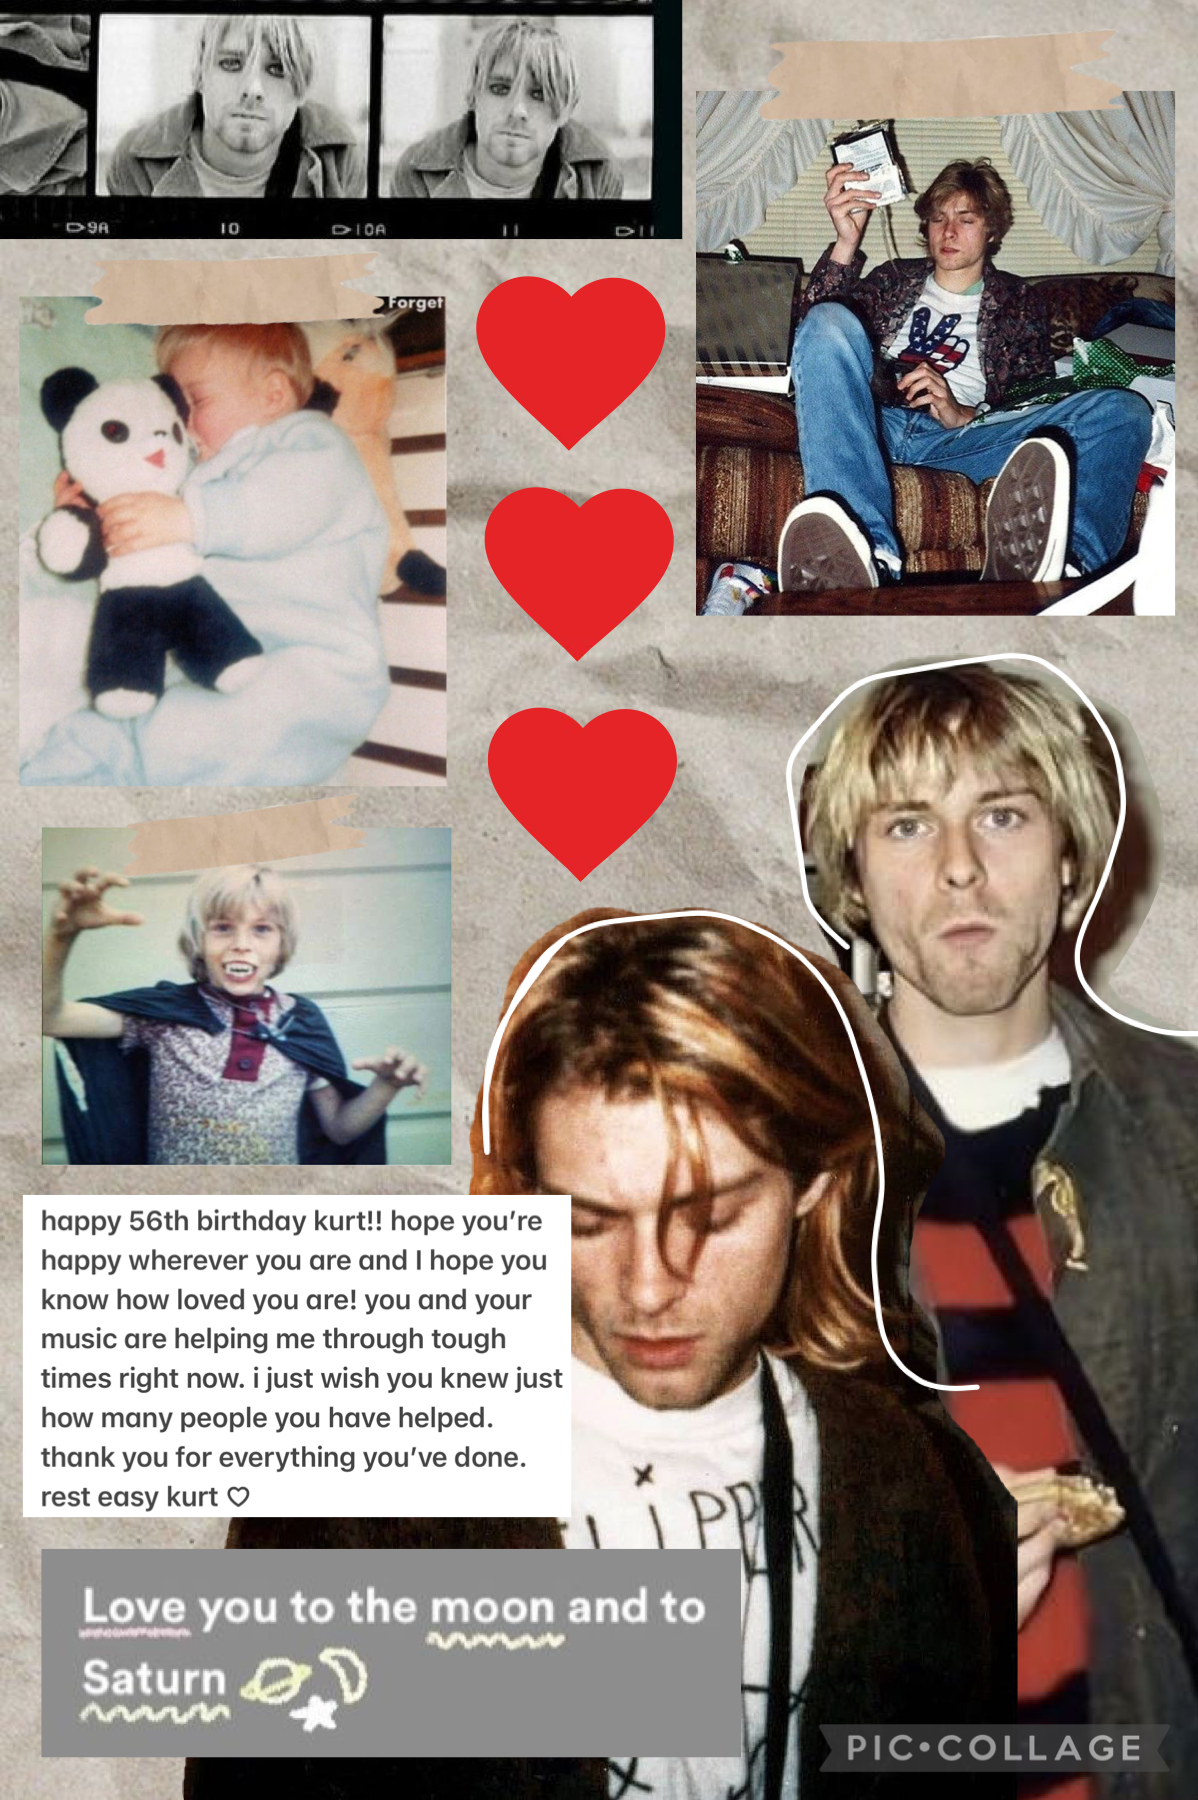 tap here! 💌

a different style just 
for this collage bc it’s 
kurt cobain’s birthday! 
he literally shaped me into
the person I am today 🫶🫶